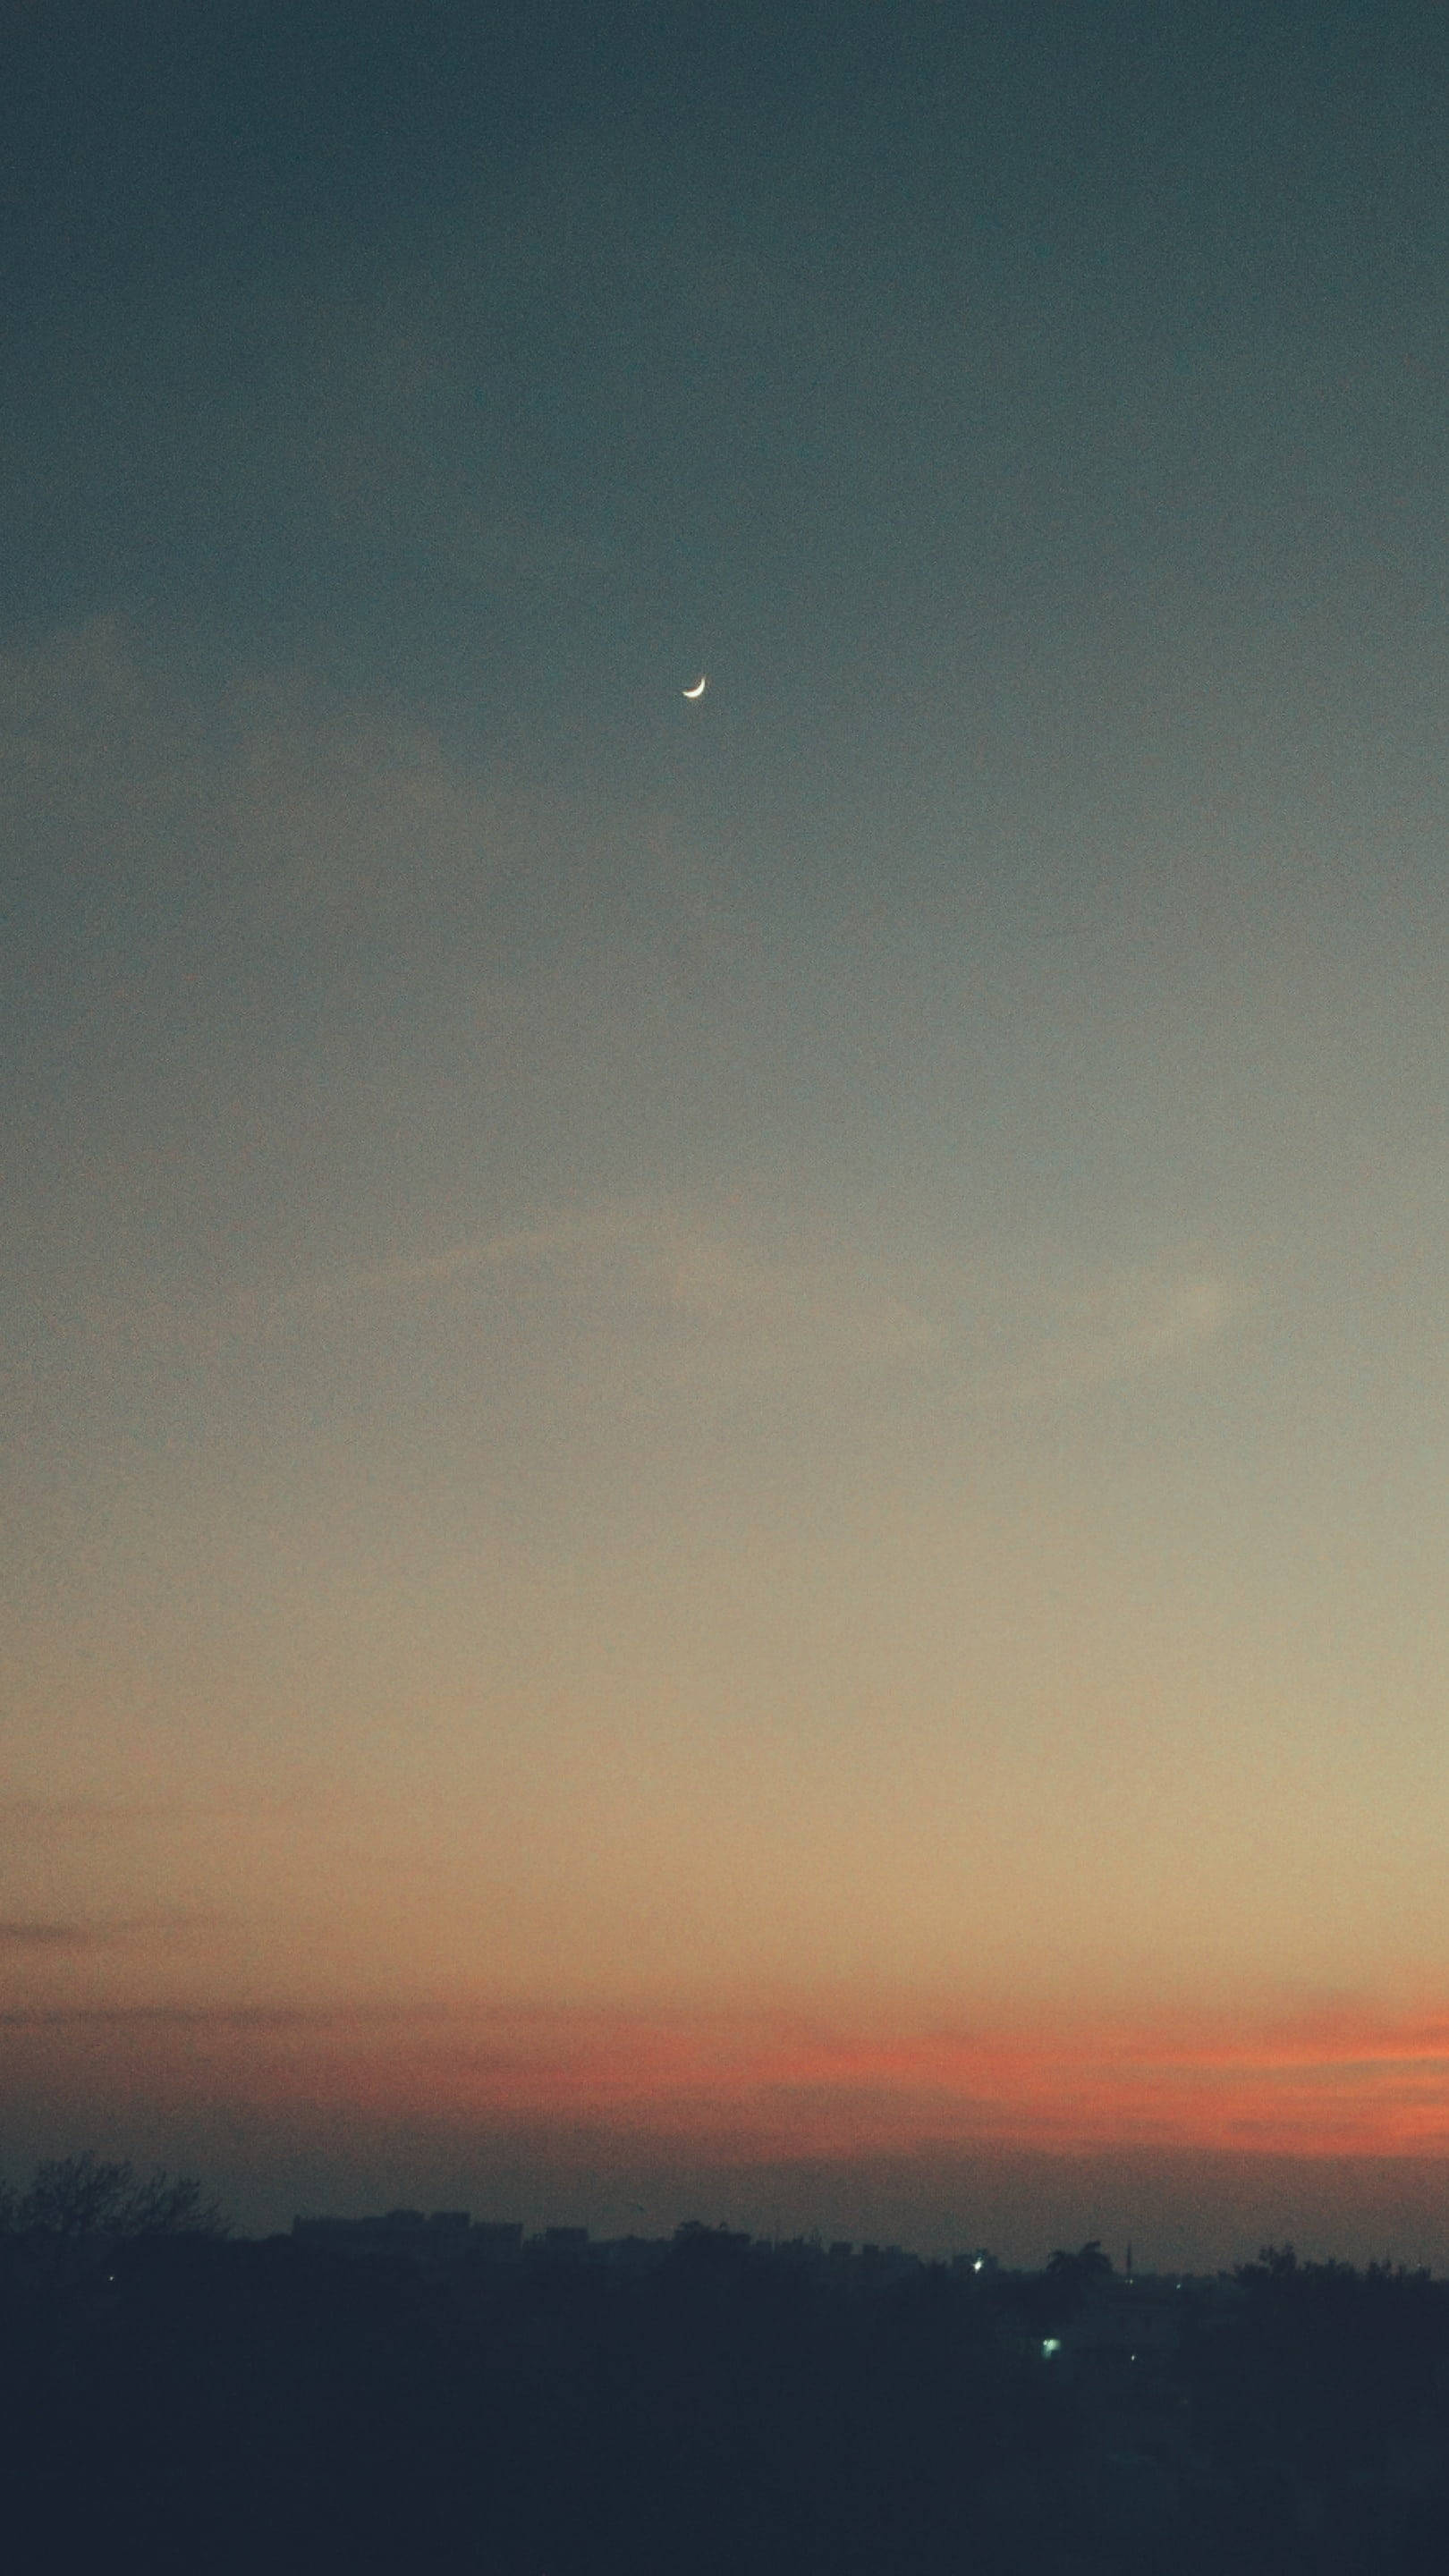 Aesthetic Sunset Sky With Crescent Moon Wallpaper